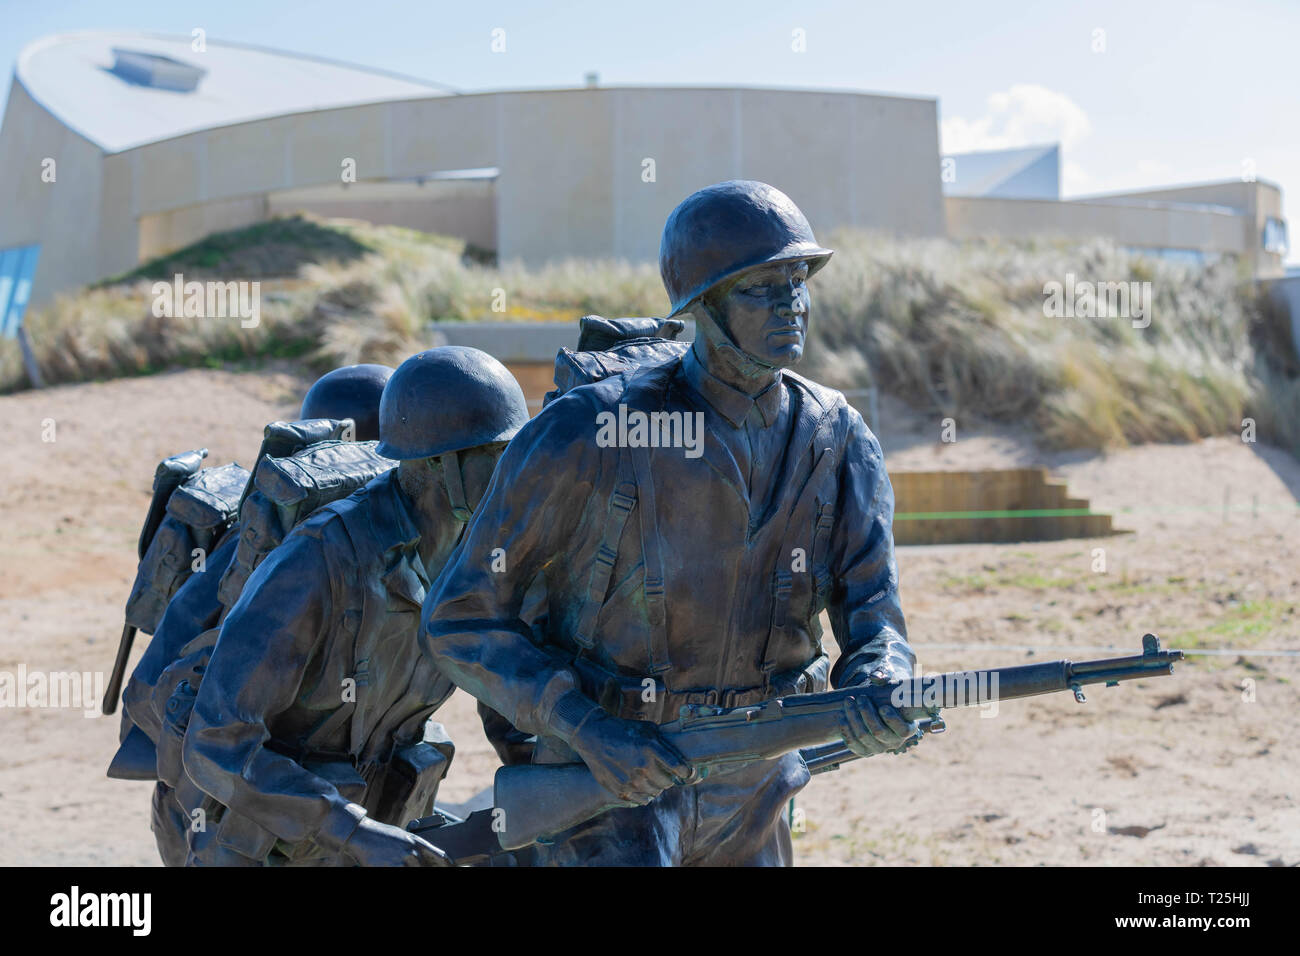 Utah Beach, Normandy, France, March 26, 2019, Higgins Memorial located at Utah Beach where the landings took place on D-Day 1944 Stock Photo